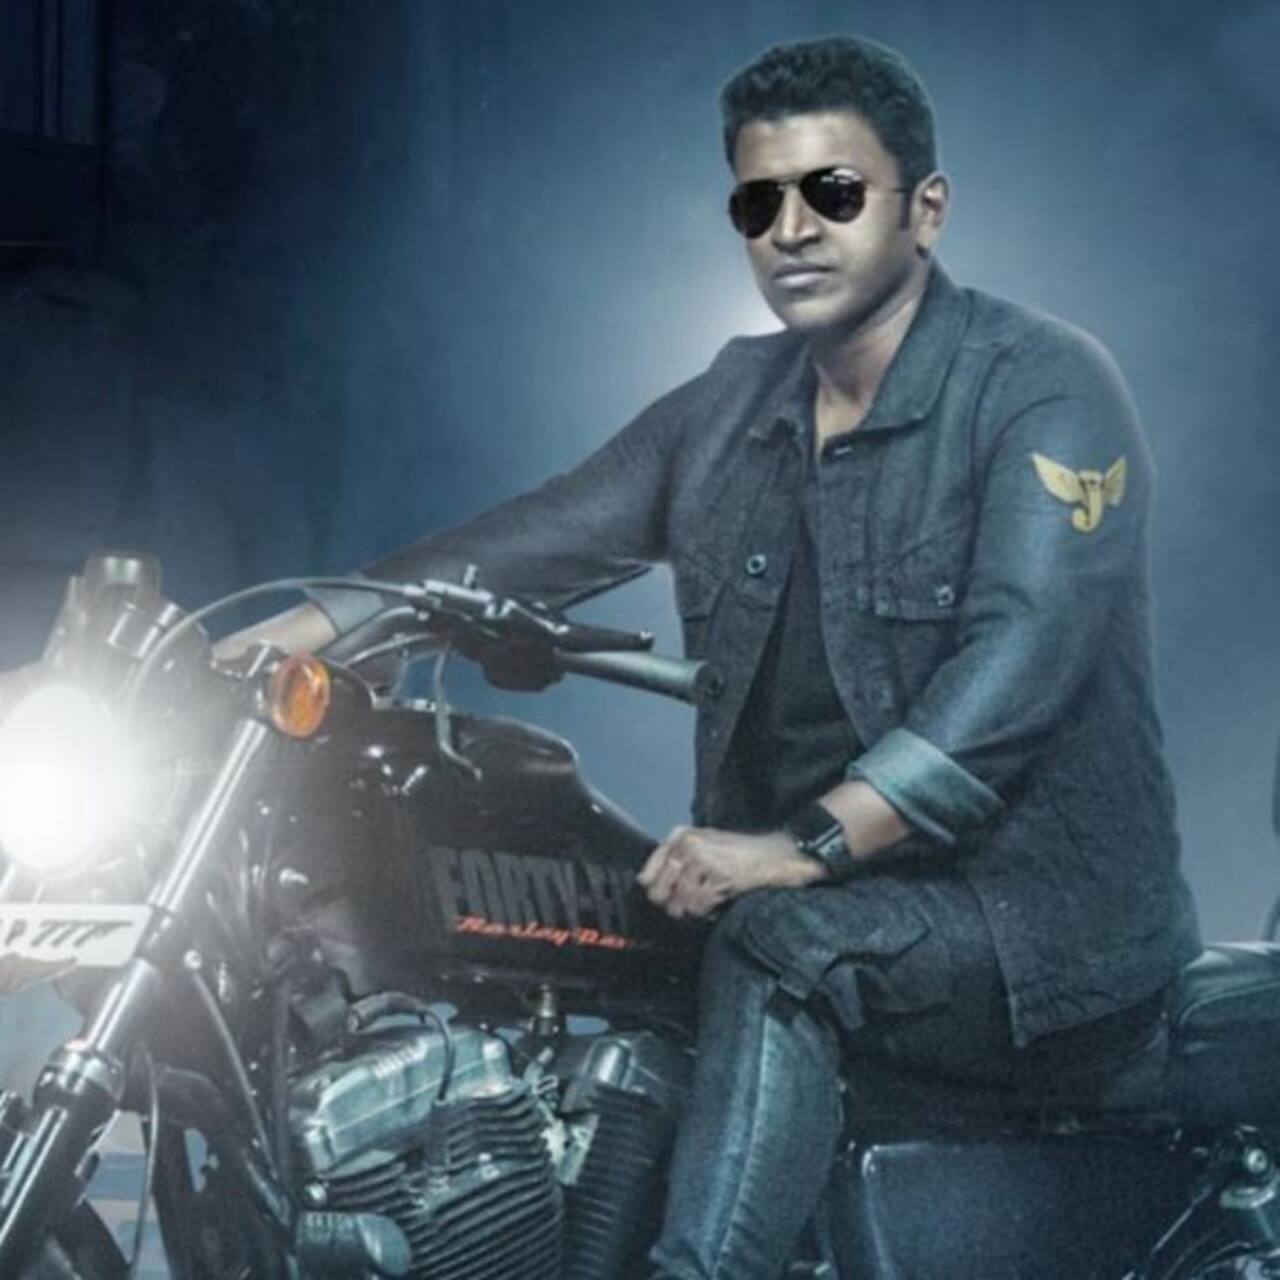 James box office collection day 1: Puneeth Rajkumar's last film takes a historic opening for Kannada film industry